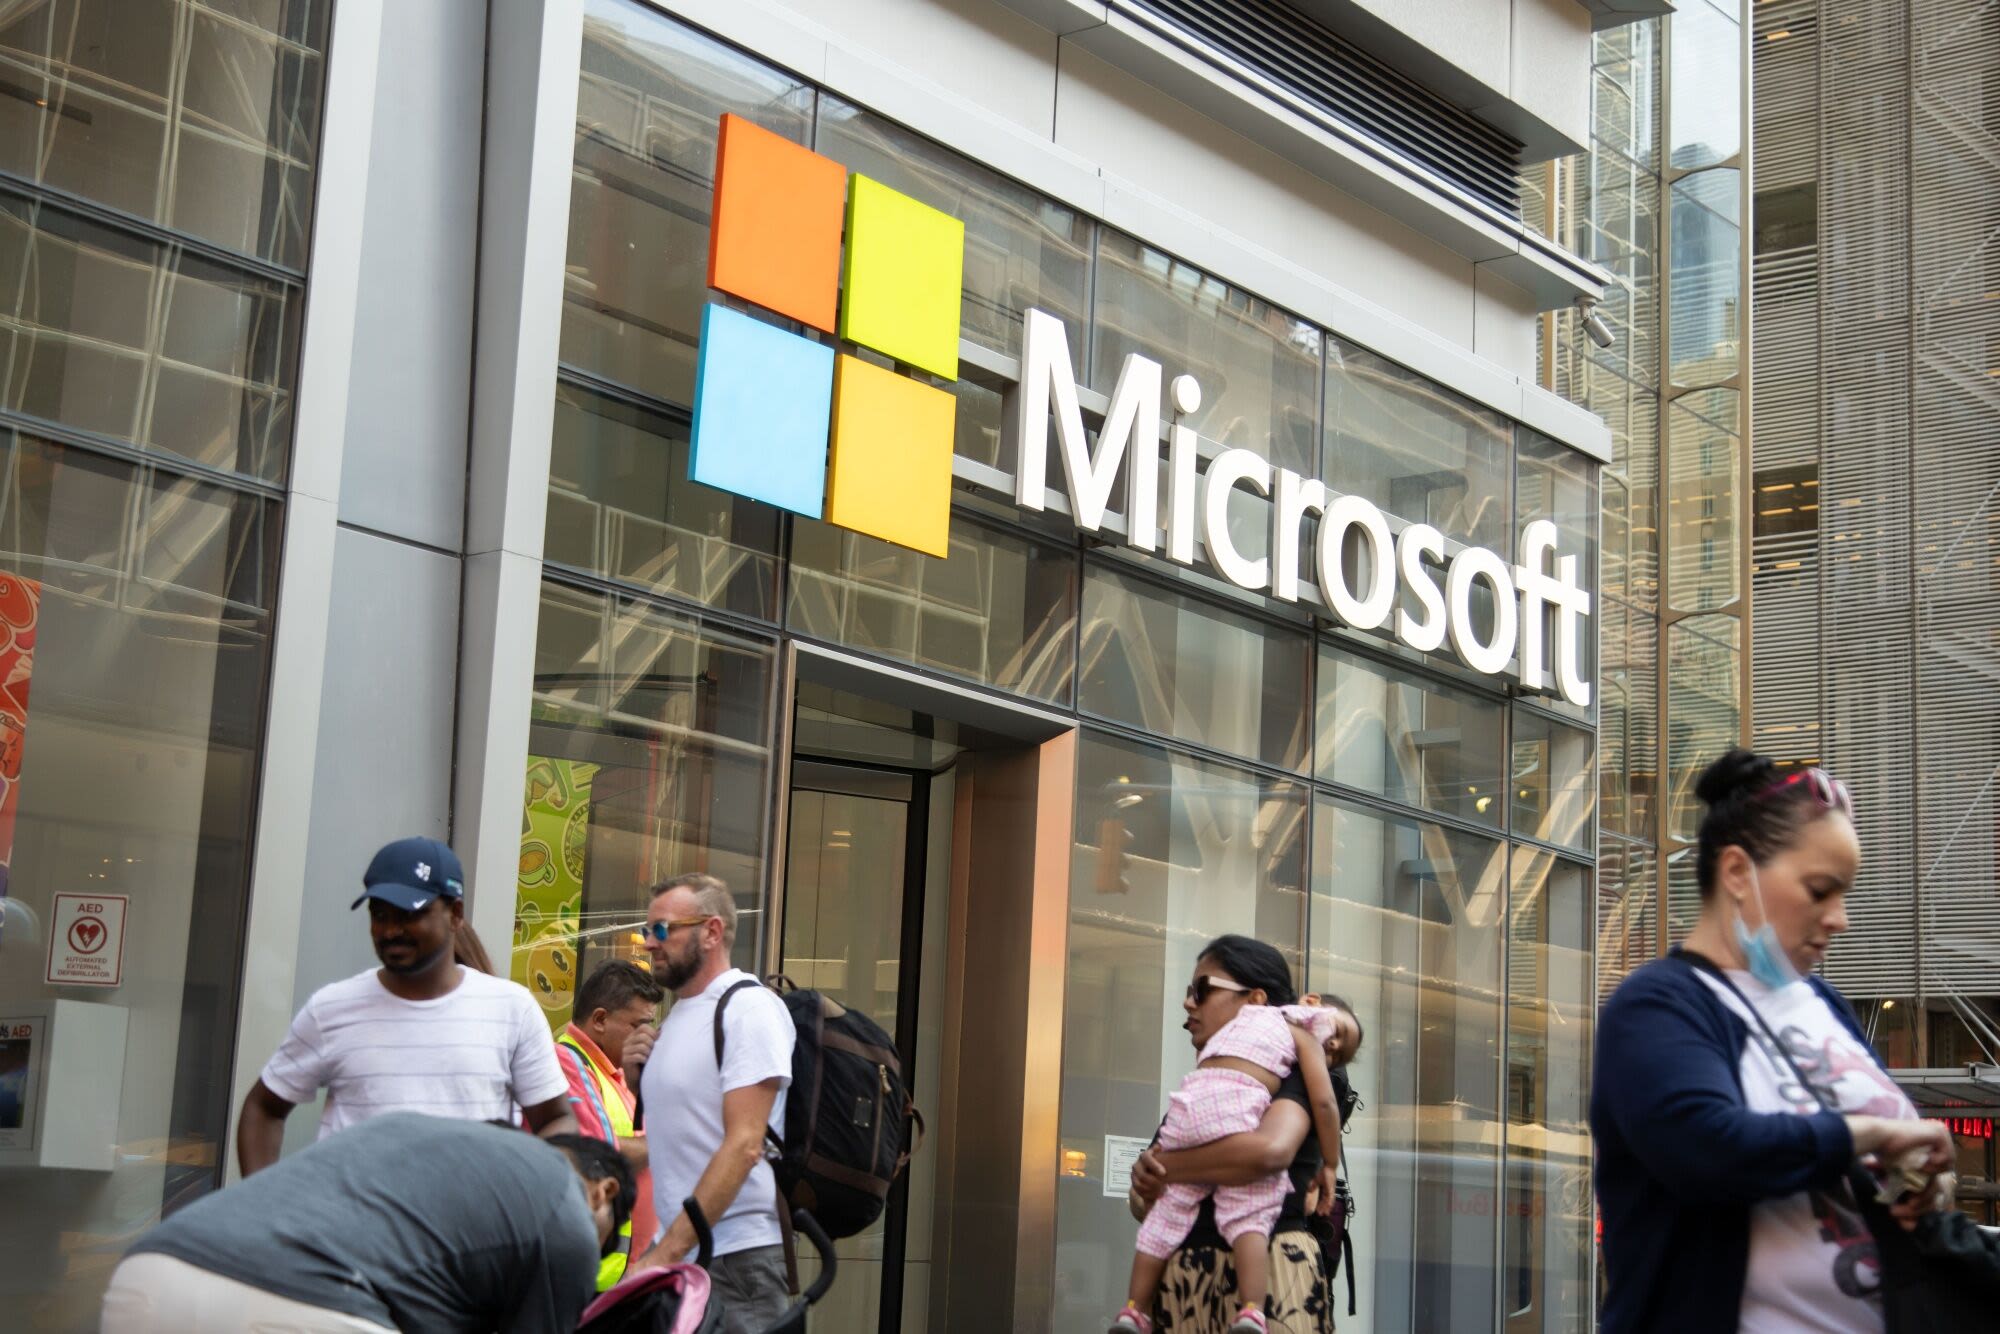 Microsoft’s Azure Growth Slows, Testing Investors’ Patience